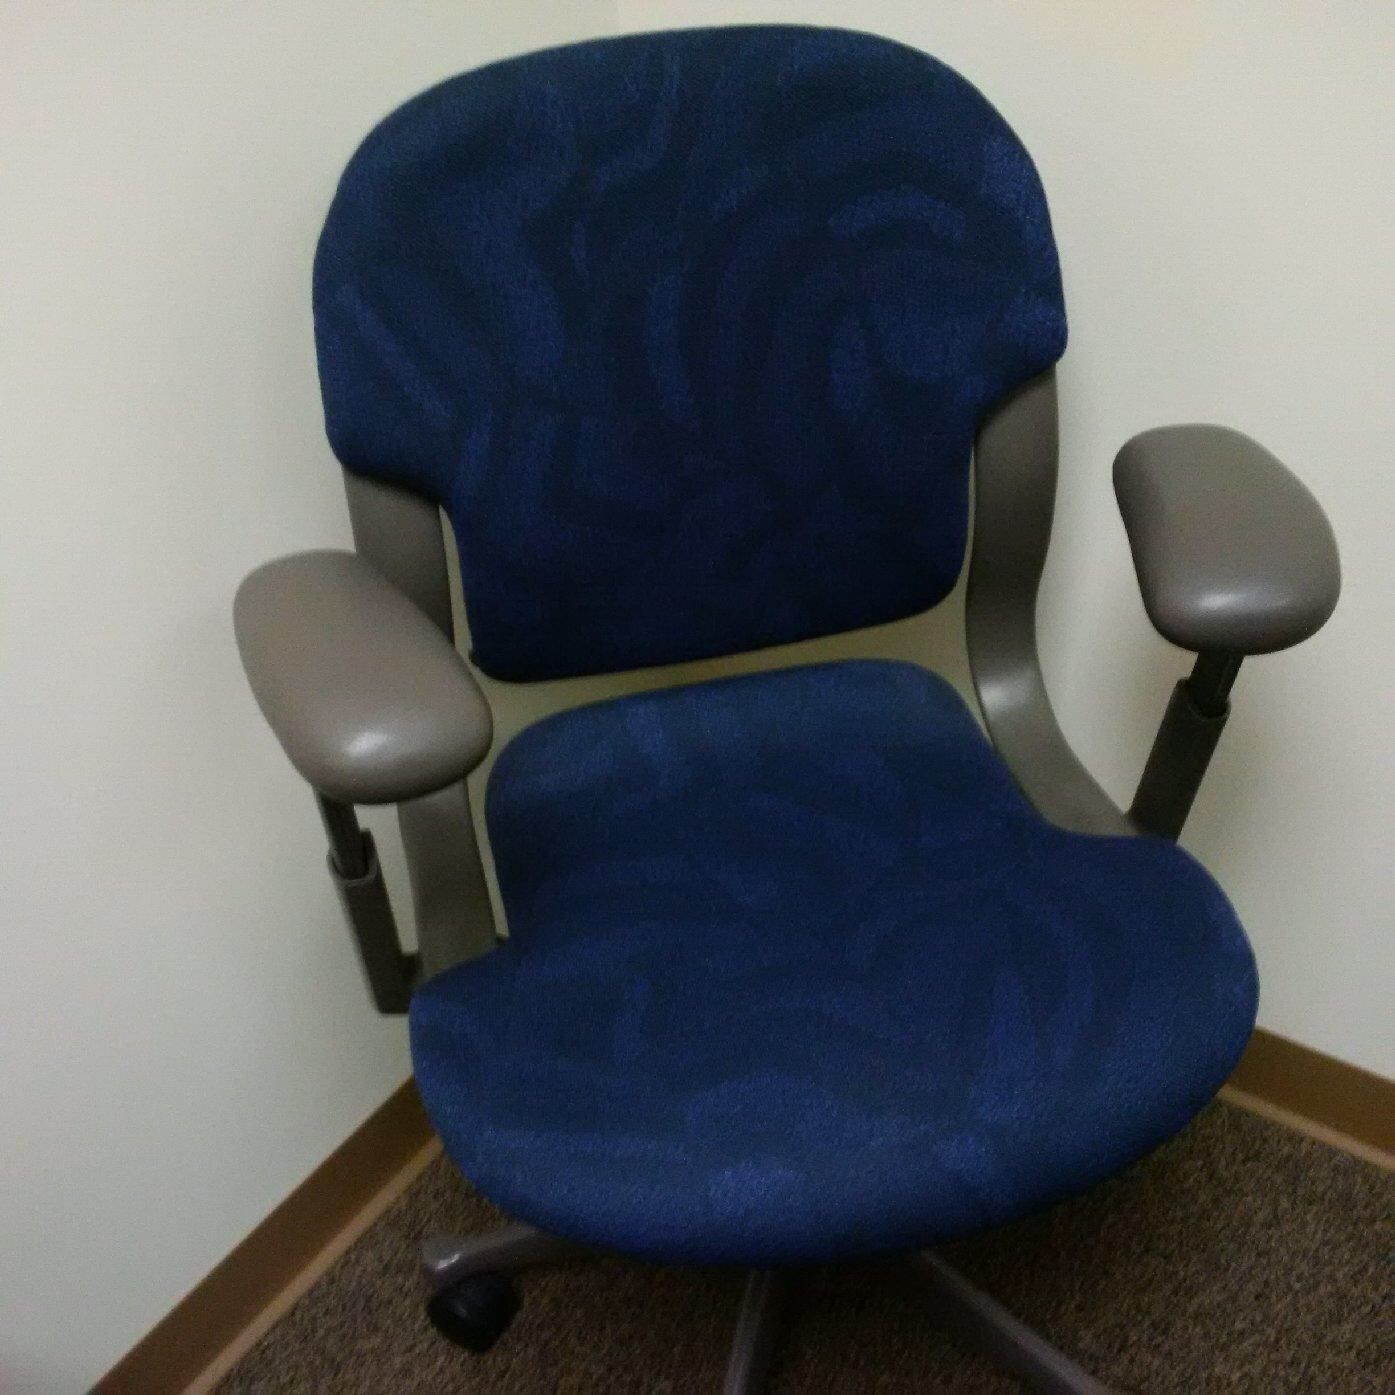 Desk, office chairs on wheels. 4 + available for $25 each. Very good - great condition